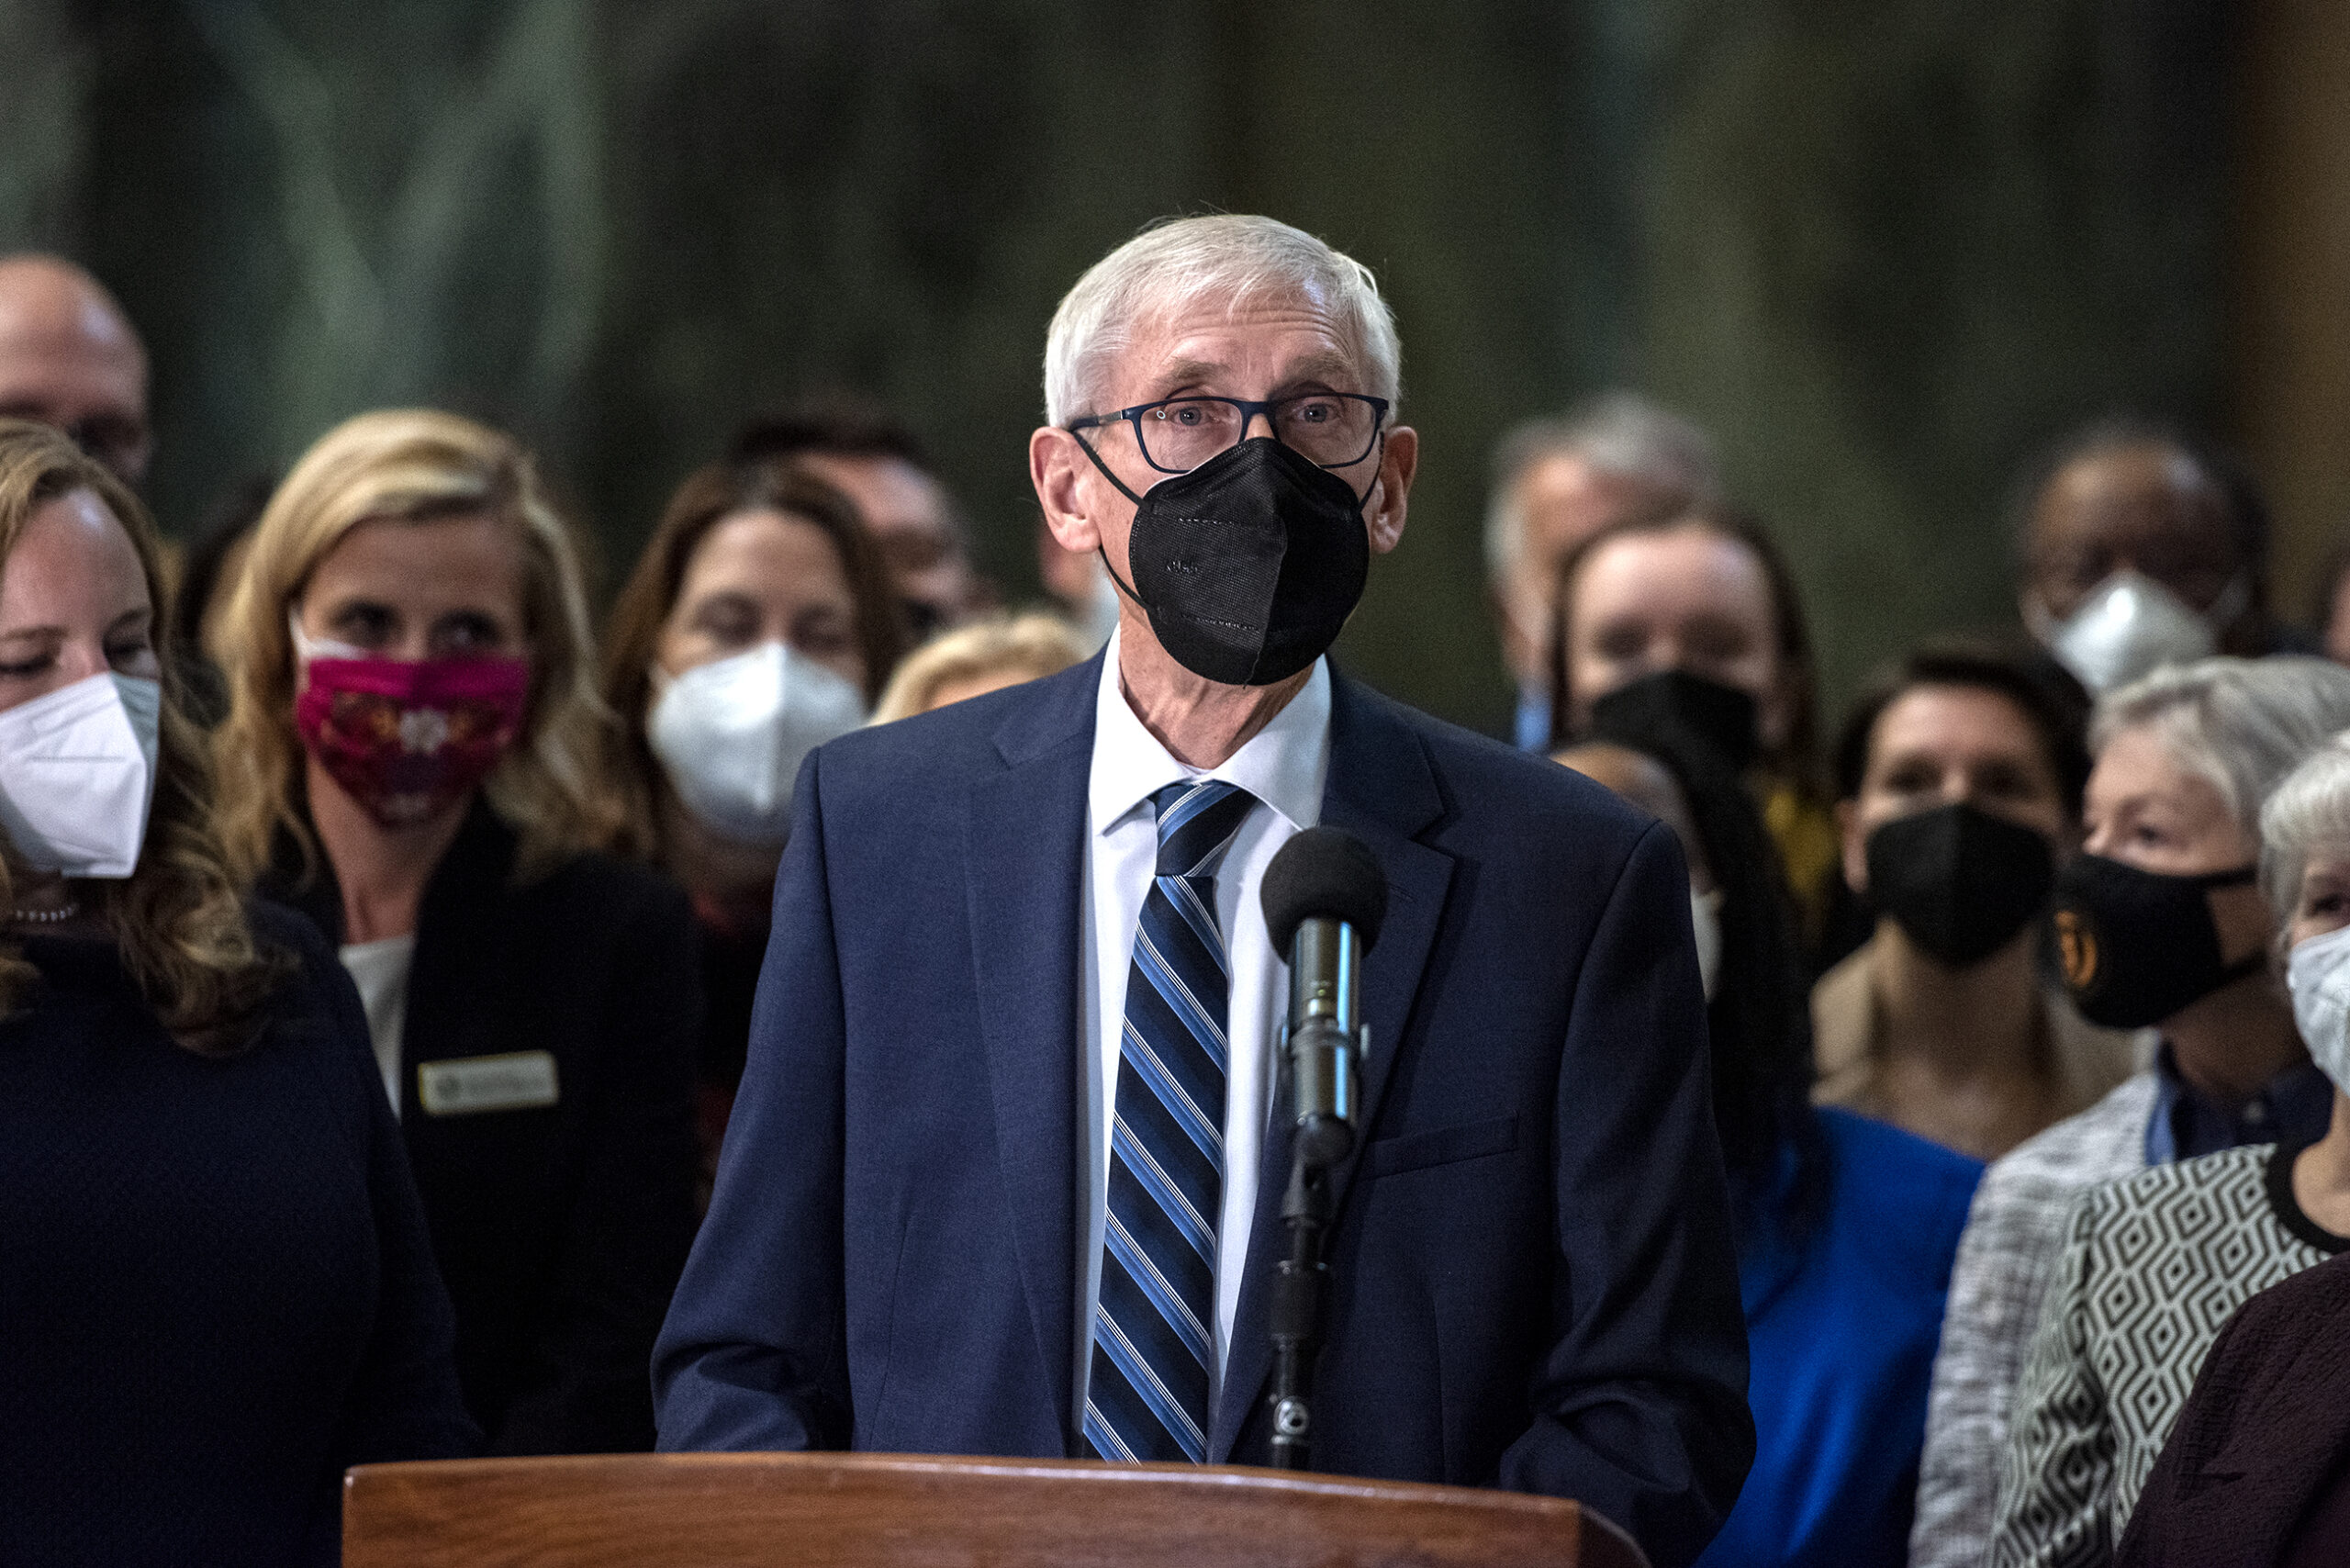 Gov. Tony Evers wears a black face mask as he speaks at a podium surrounded by lawmakers.